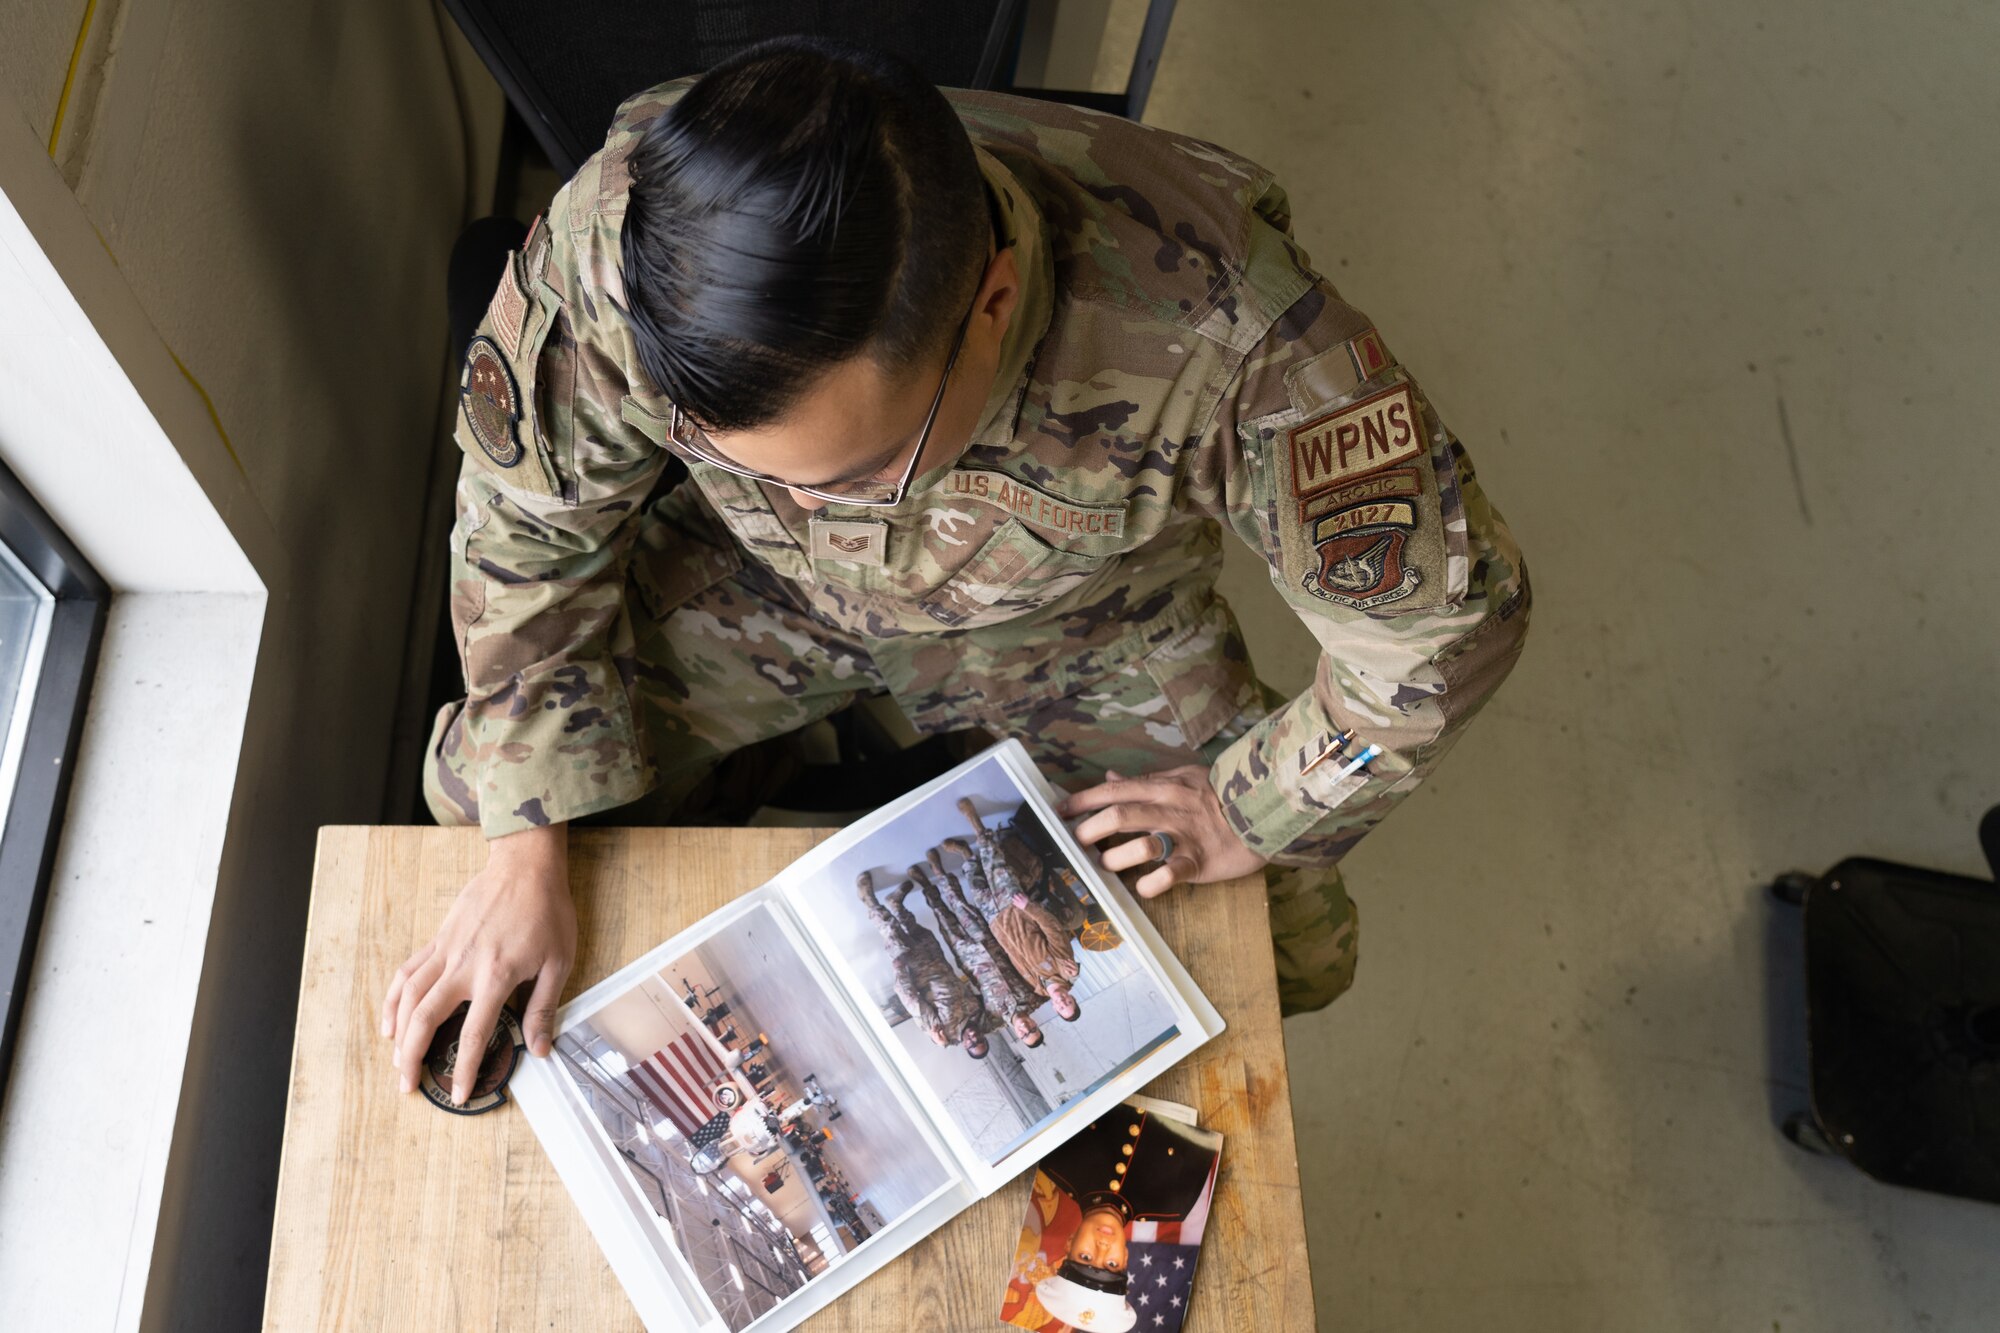 U.S. Air Force Tech. Sgt. Jorge L. Galvez, armament support section chief assigned to the 3rd Munitions squadron at Joint Base Elmendorf-Richardson, Alaska, poses with family and personal photos displaying his previous career field as an Aviation ordnance technician in the United States Marine Corps Oct. 13, 2023.